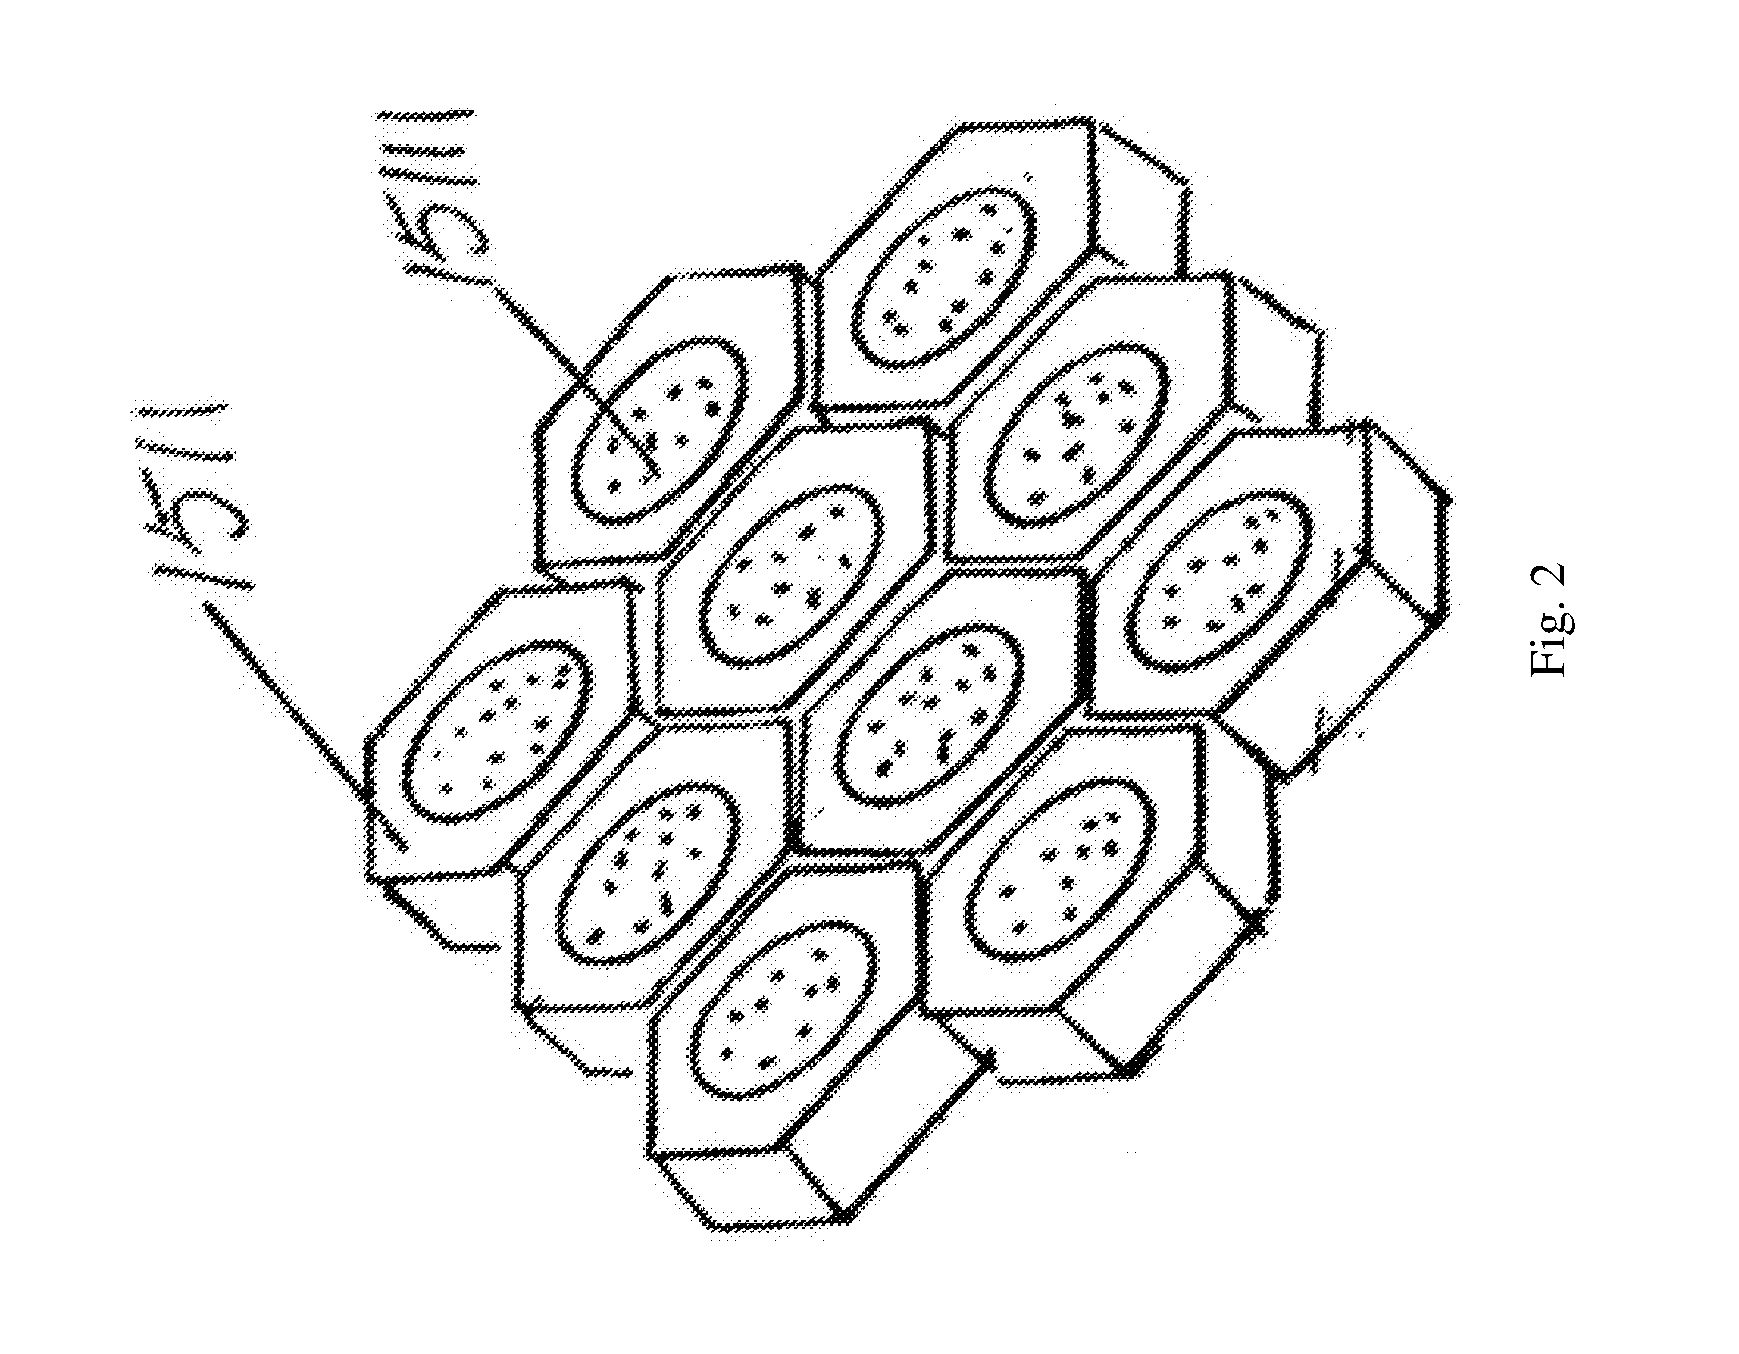 In-situ purification island structure and the construction method thereof